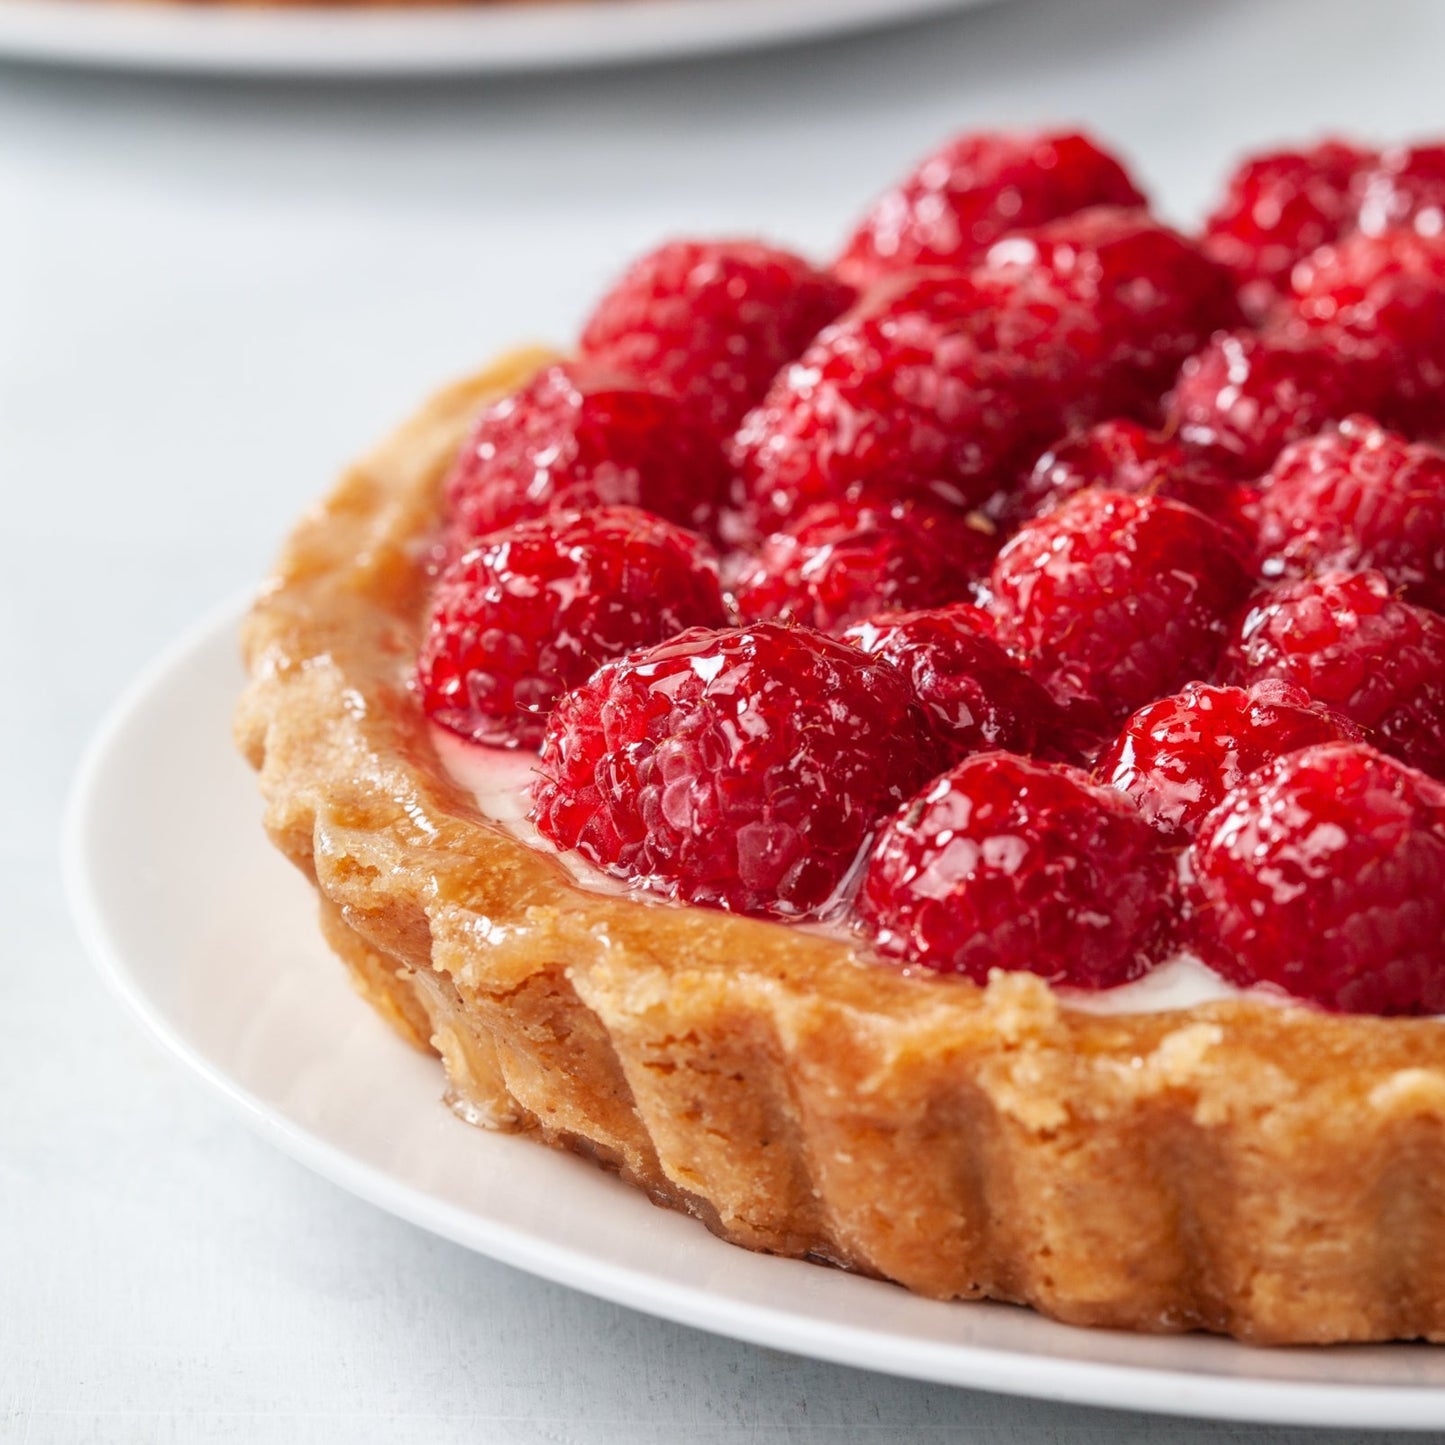 Raspberry tart with crimped edges on a white plate